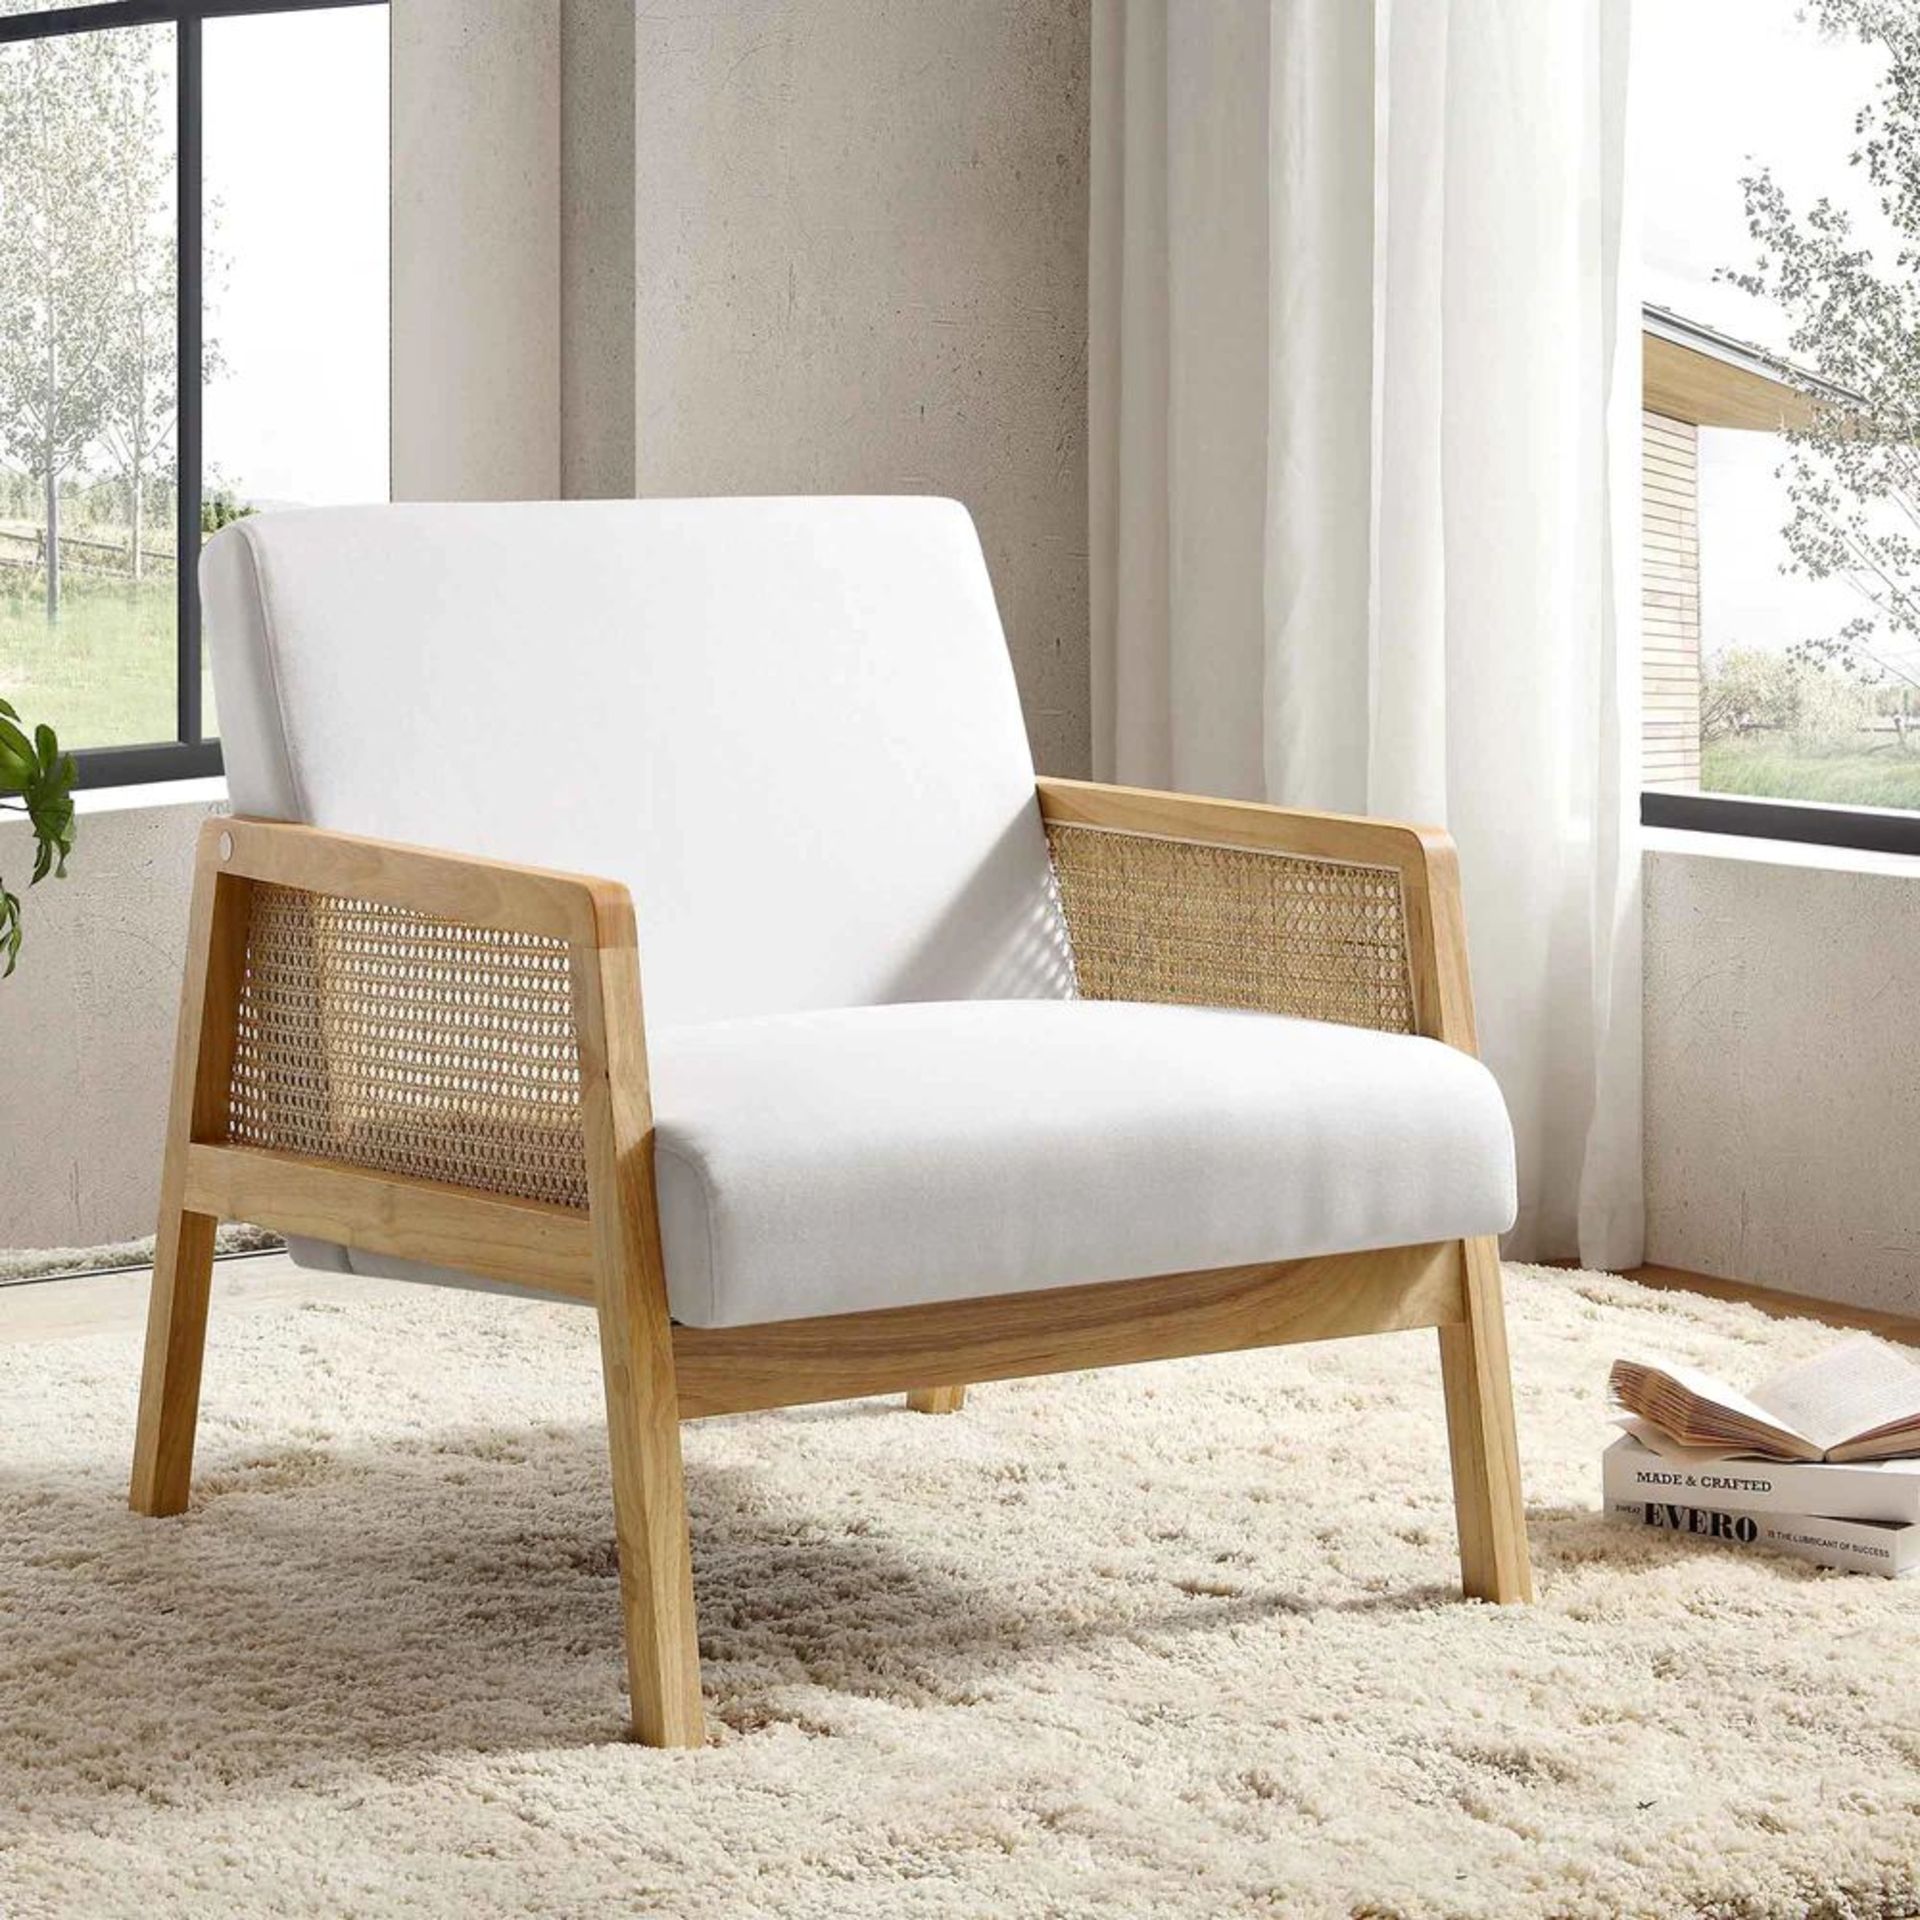 Fyne Beige Fabric Natural Frame Rattan Armchair. - ER29. RRP £239.99. Crafted from solid wood, the